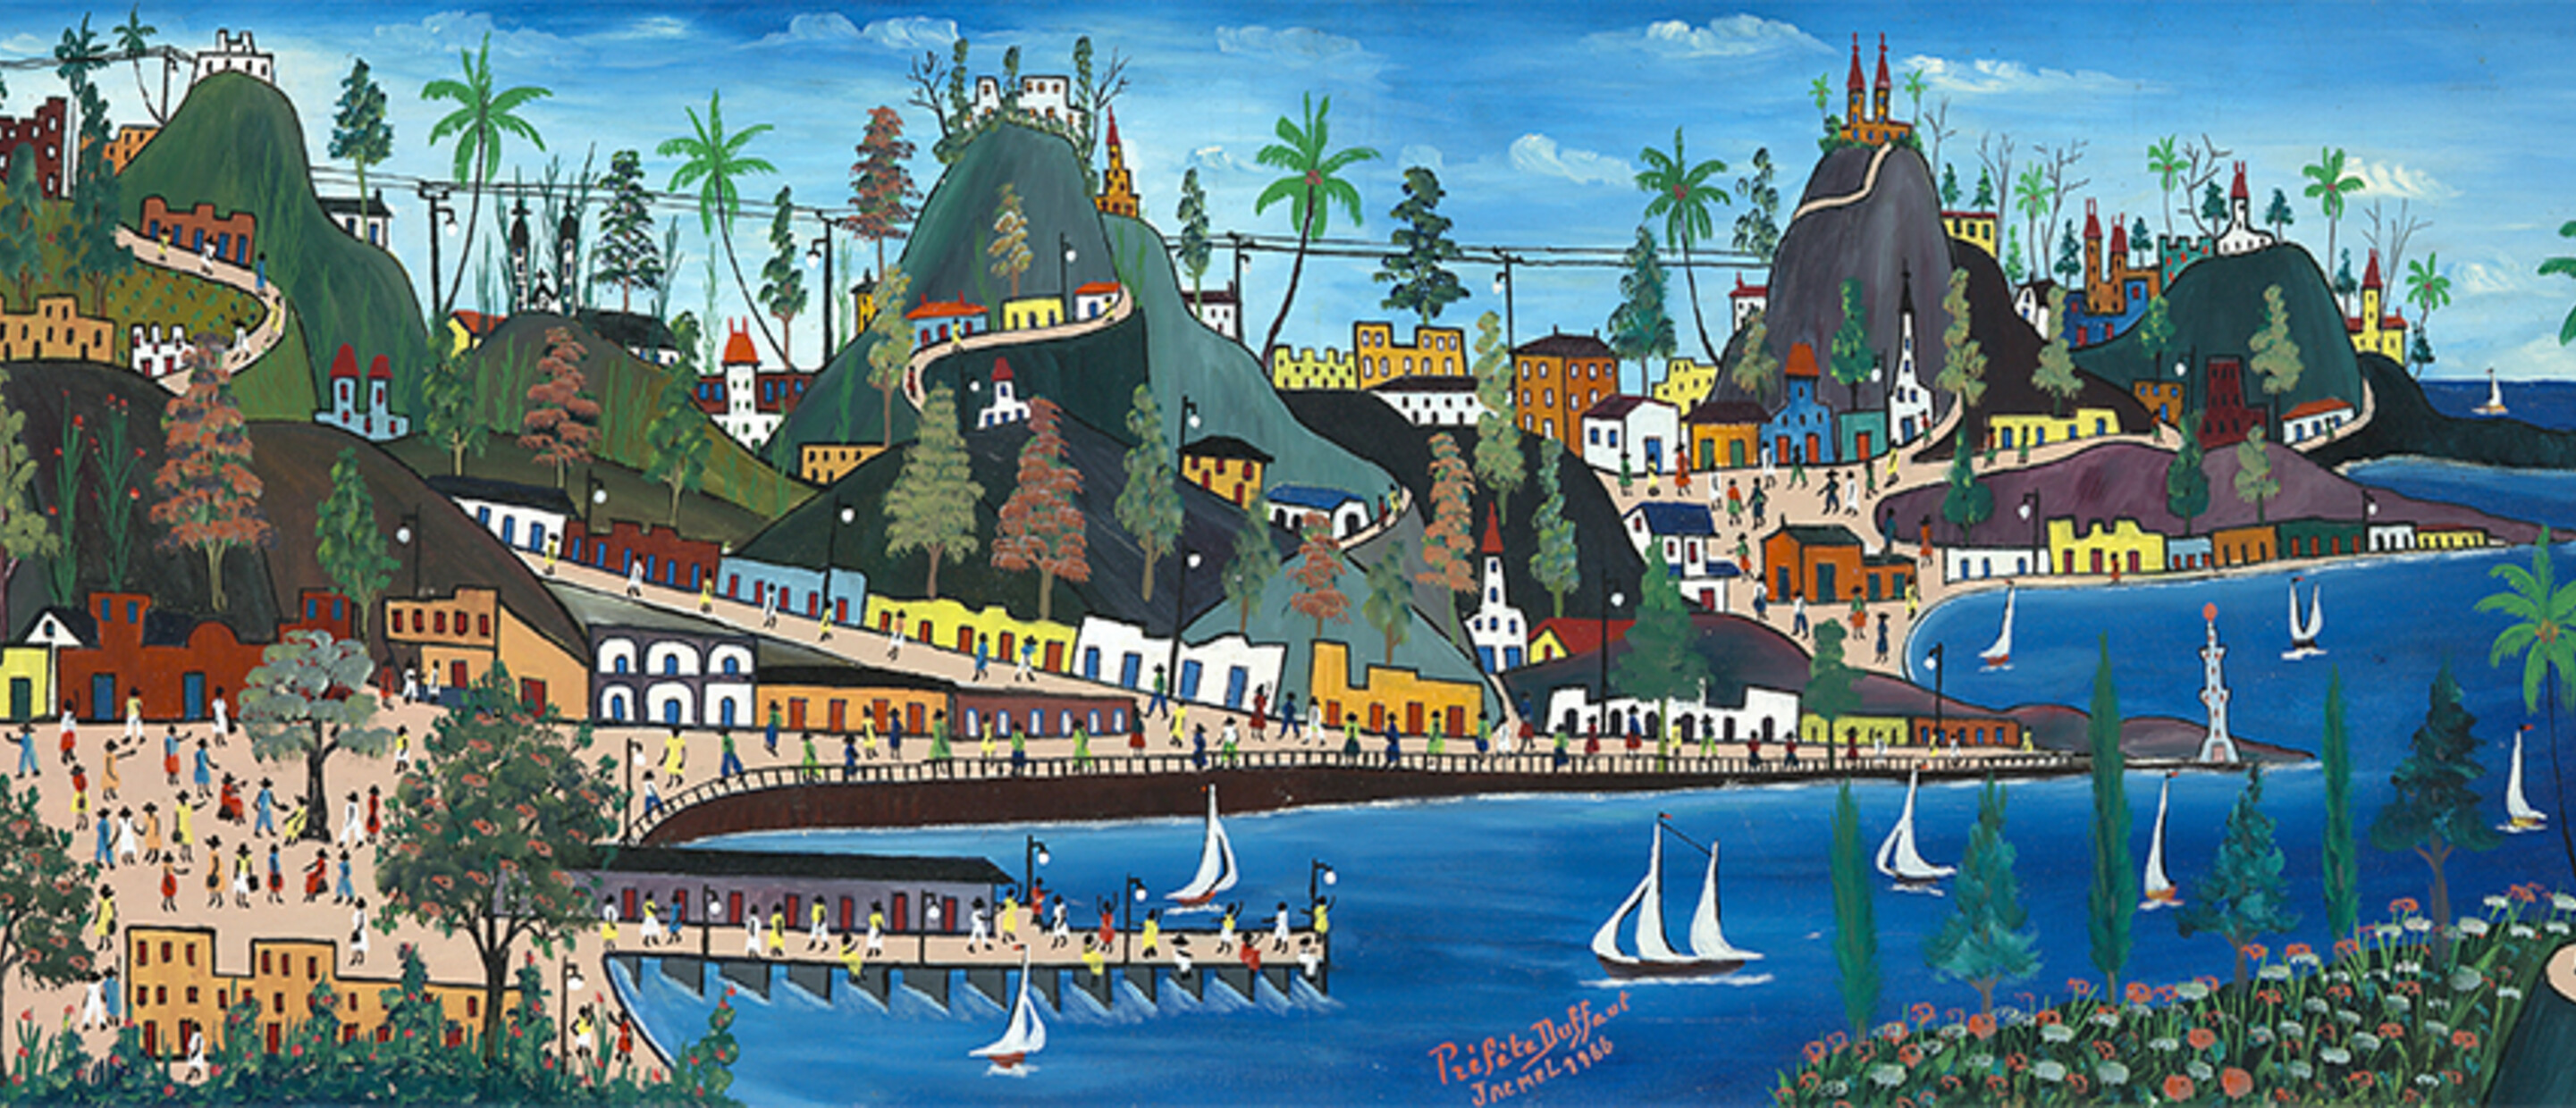 Préfète Duffaut, Ville Imaginaire (Imaginary Town), 1966. Oil On canvas. "Restoring the Spirit: Celebrating Haitian Art" has been curated by Rima Birnius, originated by the Figge Art Museum, and toured by Curatorial Assistance, Pasadena, Californ